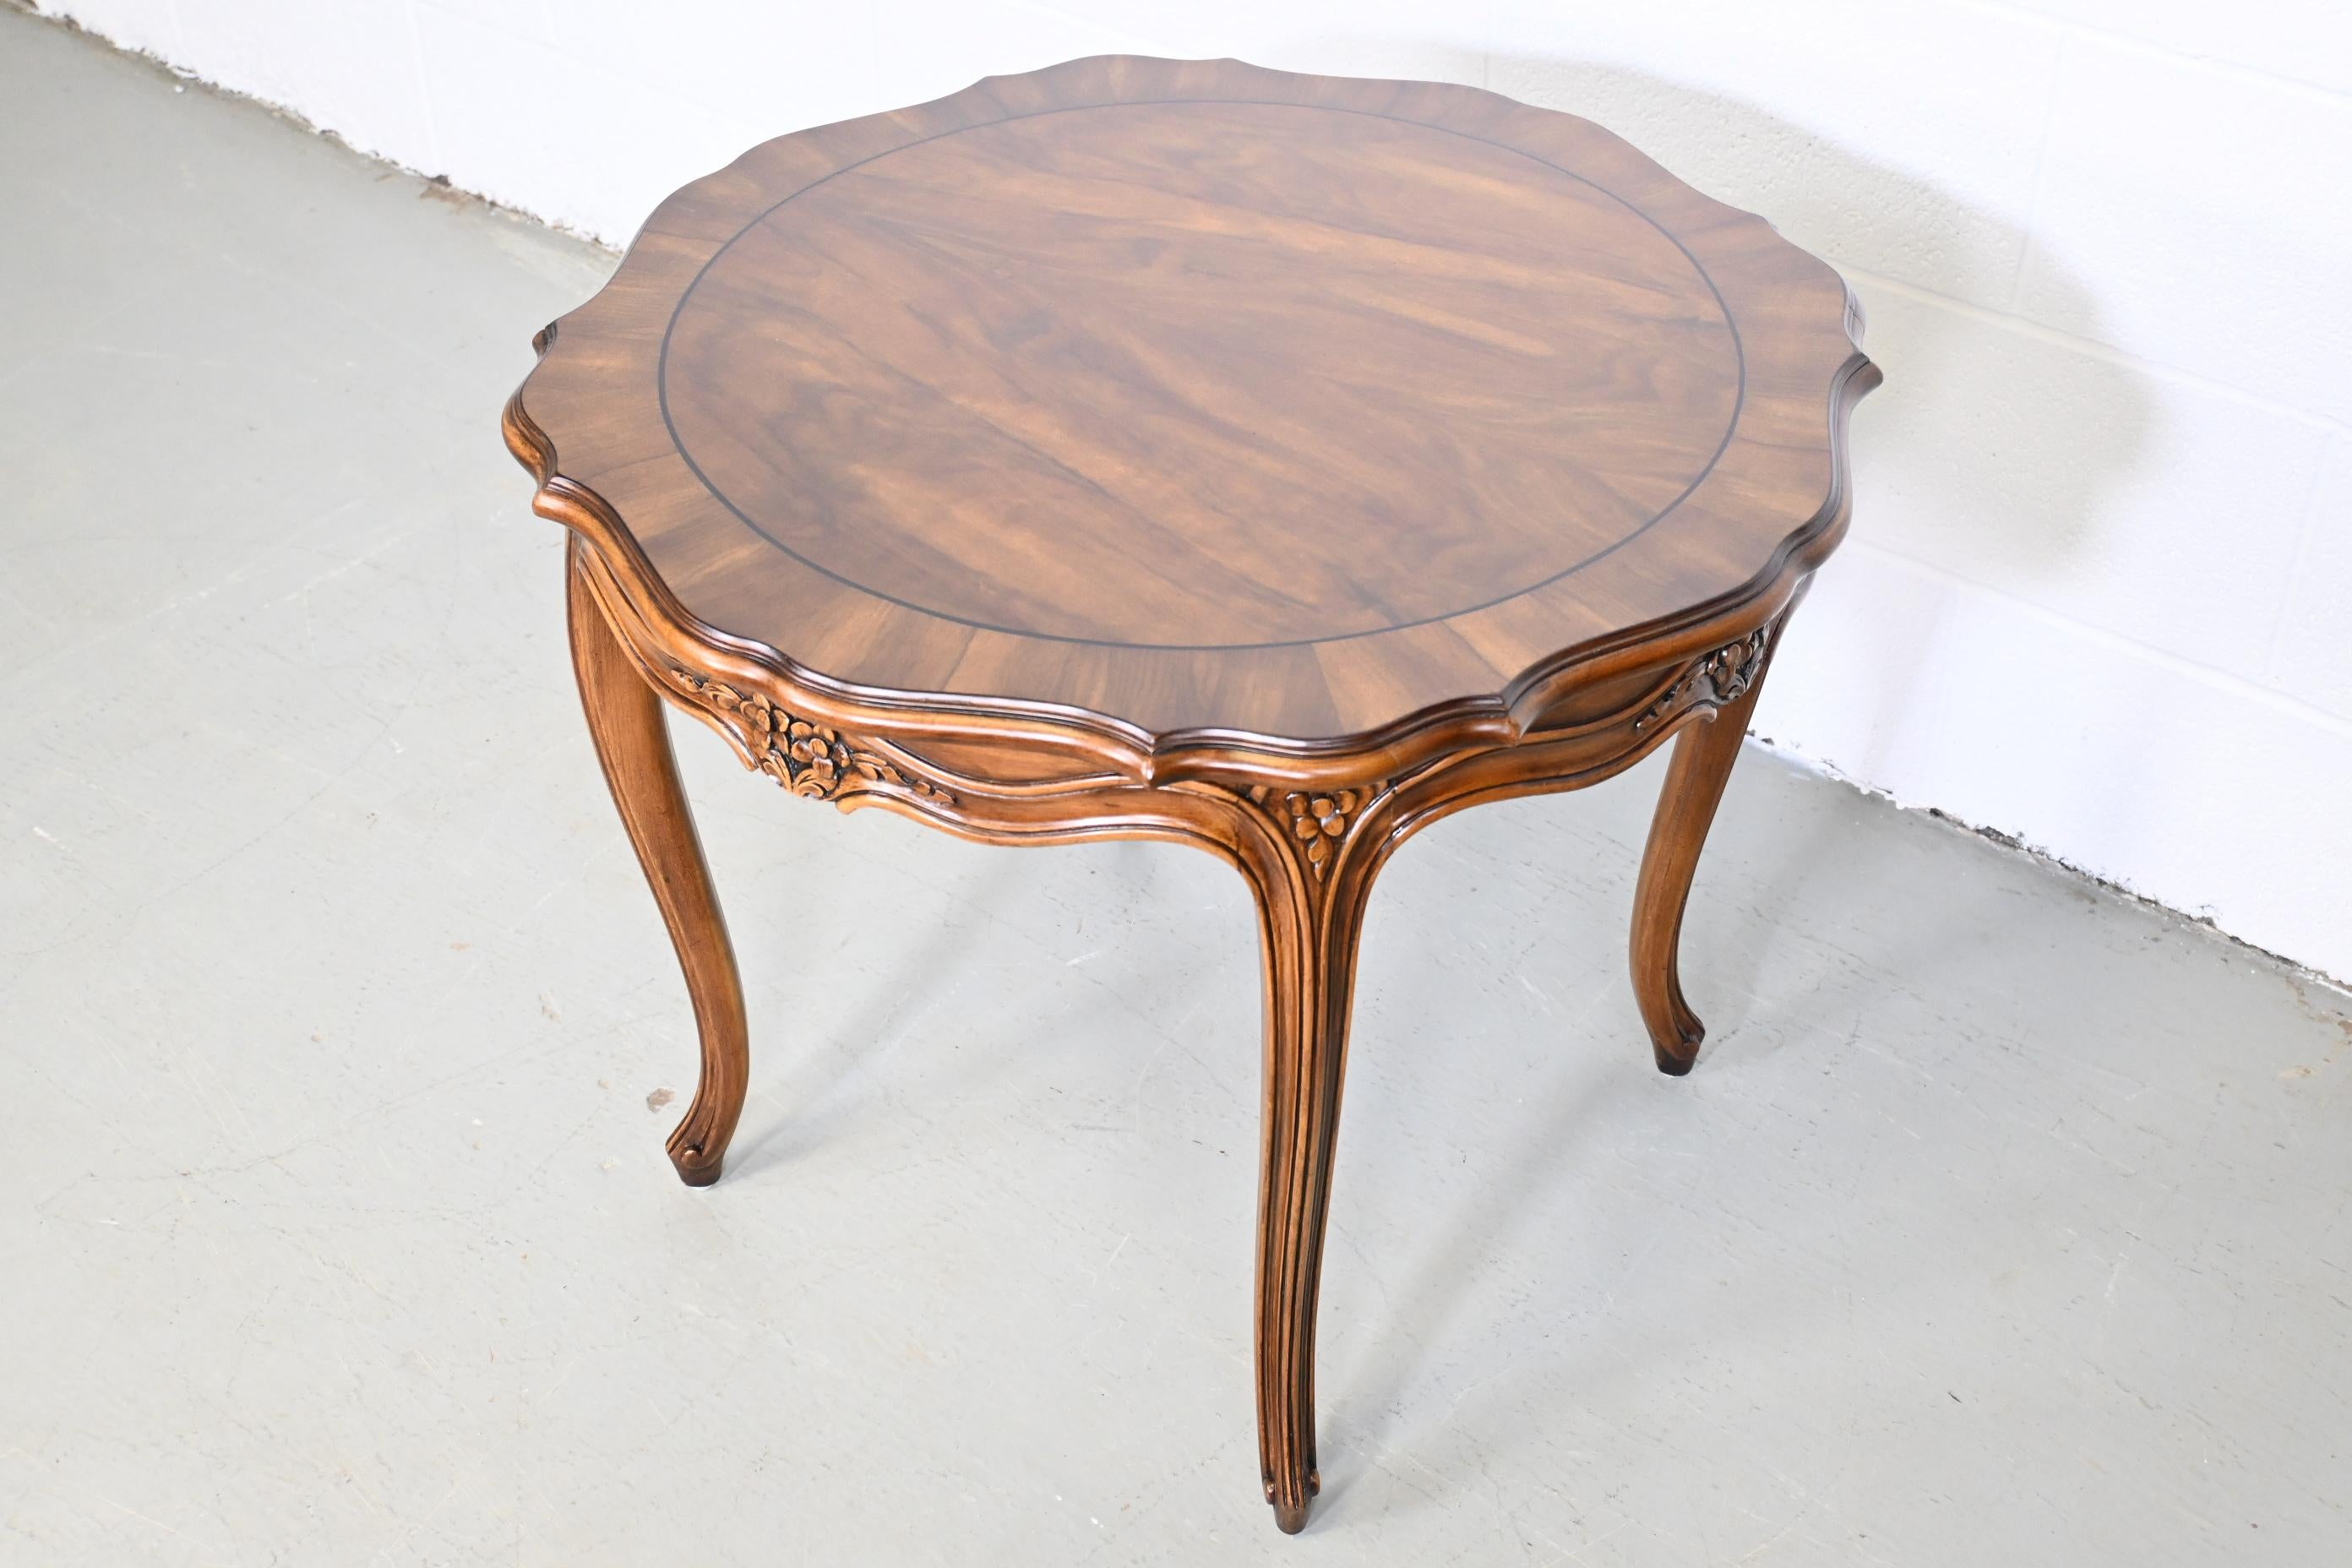 Karges Carved French Provincial side or end table

Karges Furniture, USA, 1970s

Measures: 27.5 Wide x 27.5 Deep x 23.37 High.

French Carved Round Side or End table.

Professionally restored with wear from age.